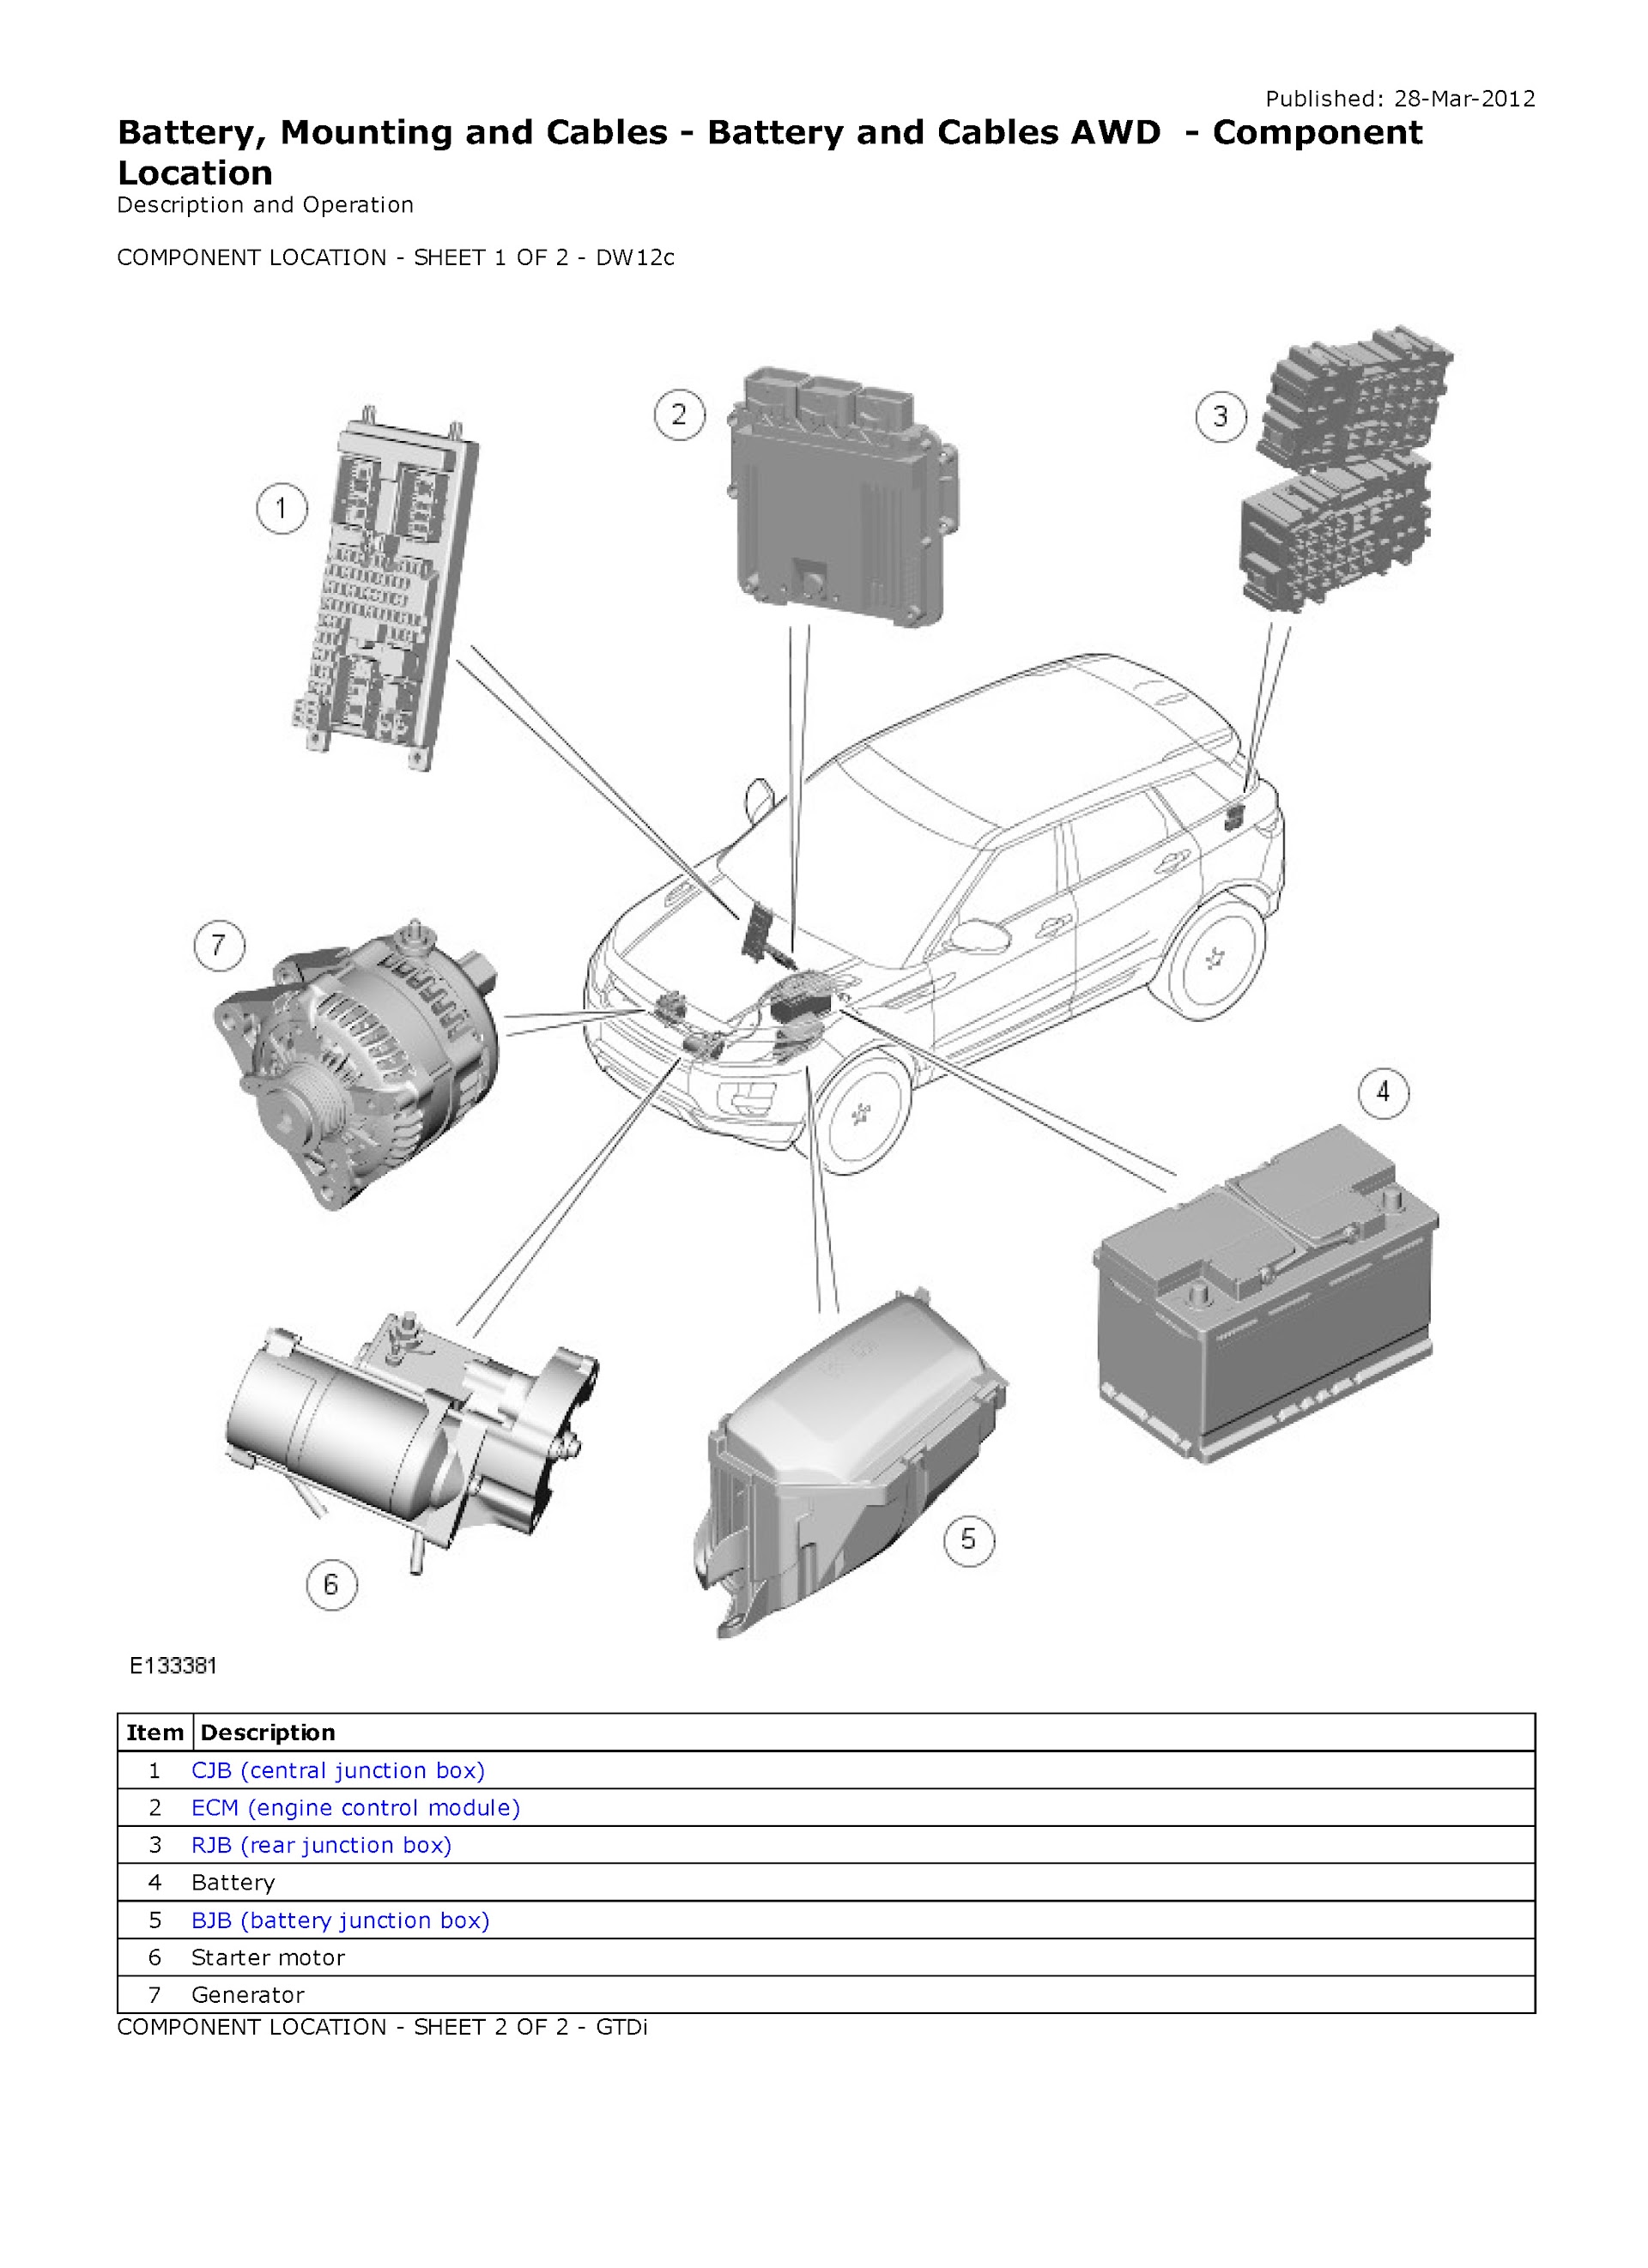 2015 Range Rover Evoque Repair Manual Battery and Cables AWD